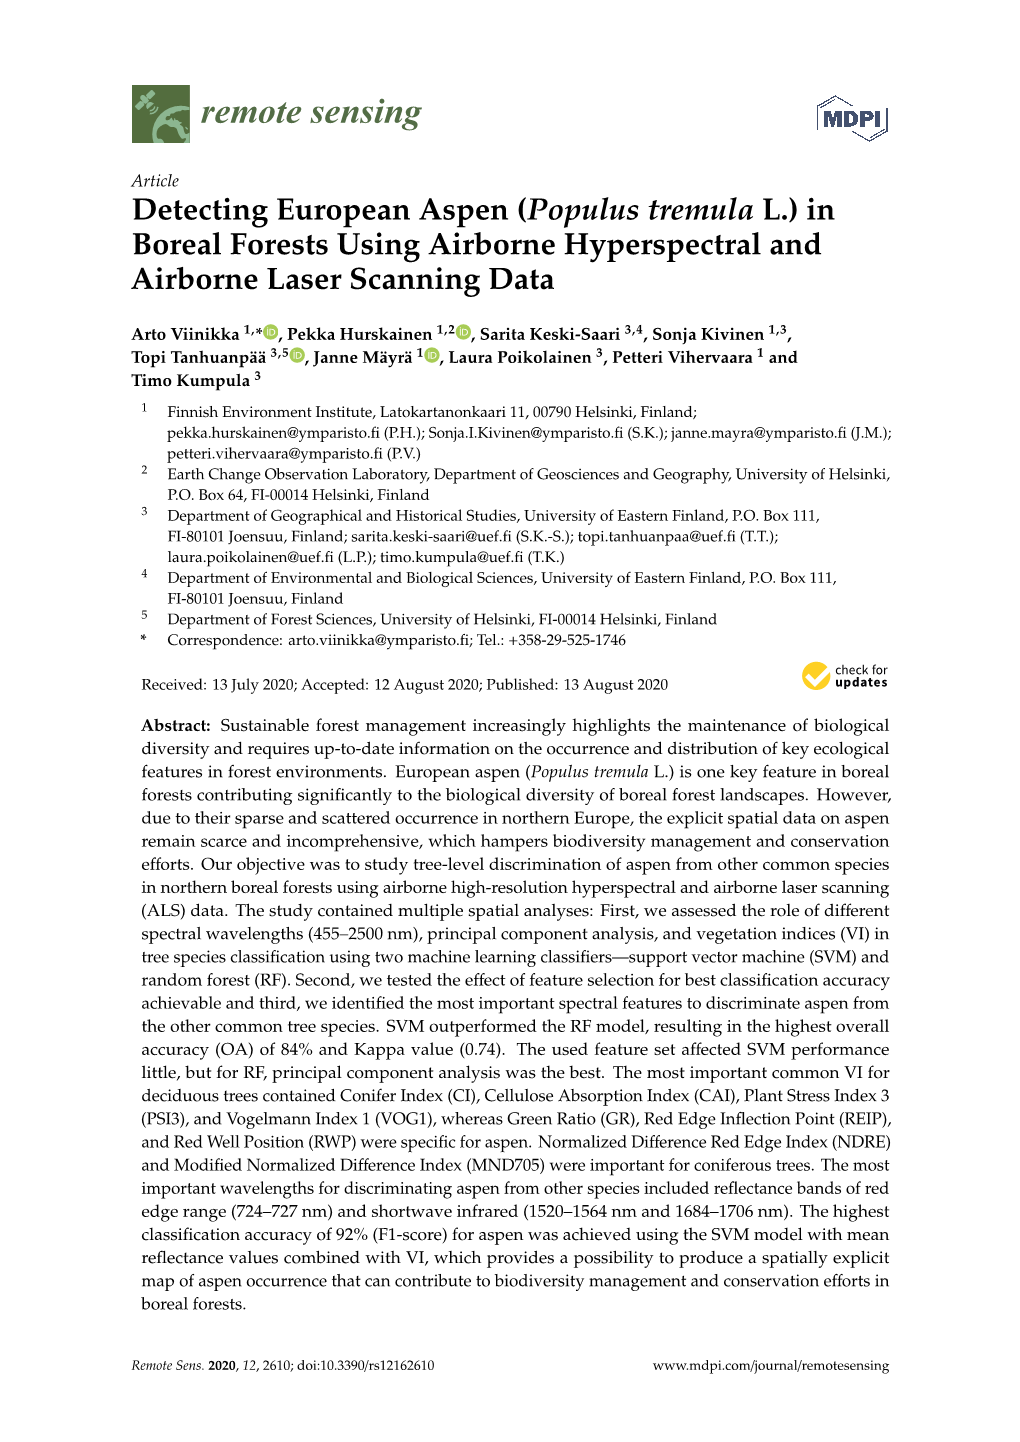 Detecting European Aspen (Populus Tremula L.) in Boreal Forests Using Airborne Hyperspectral and Airborne Laser Scanning Data